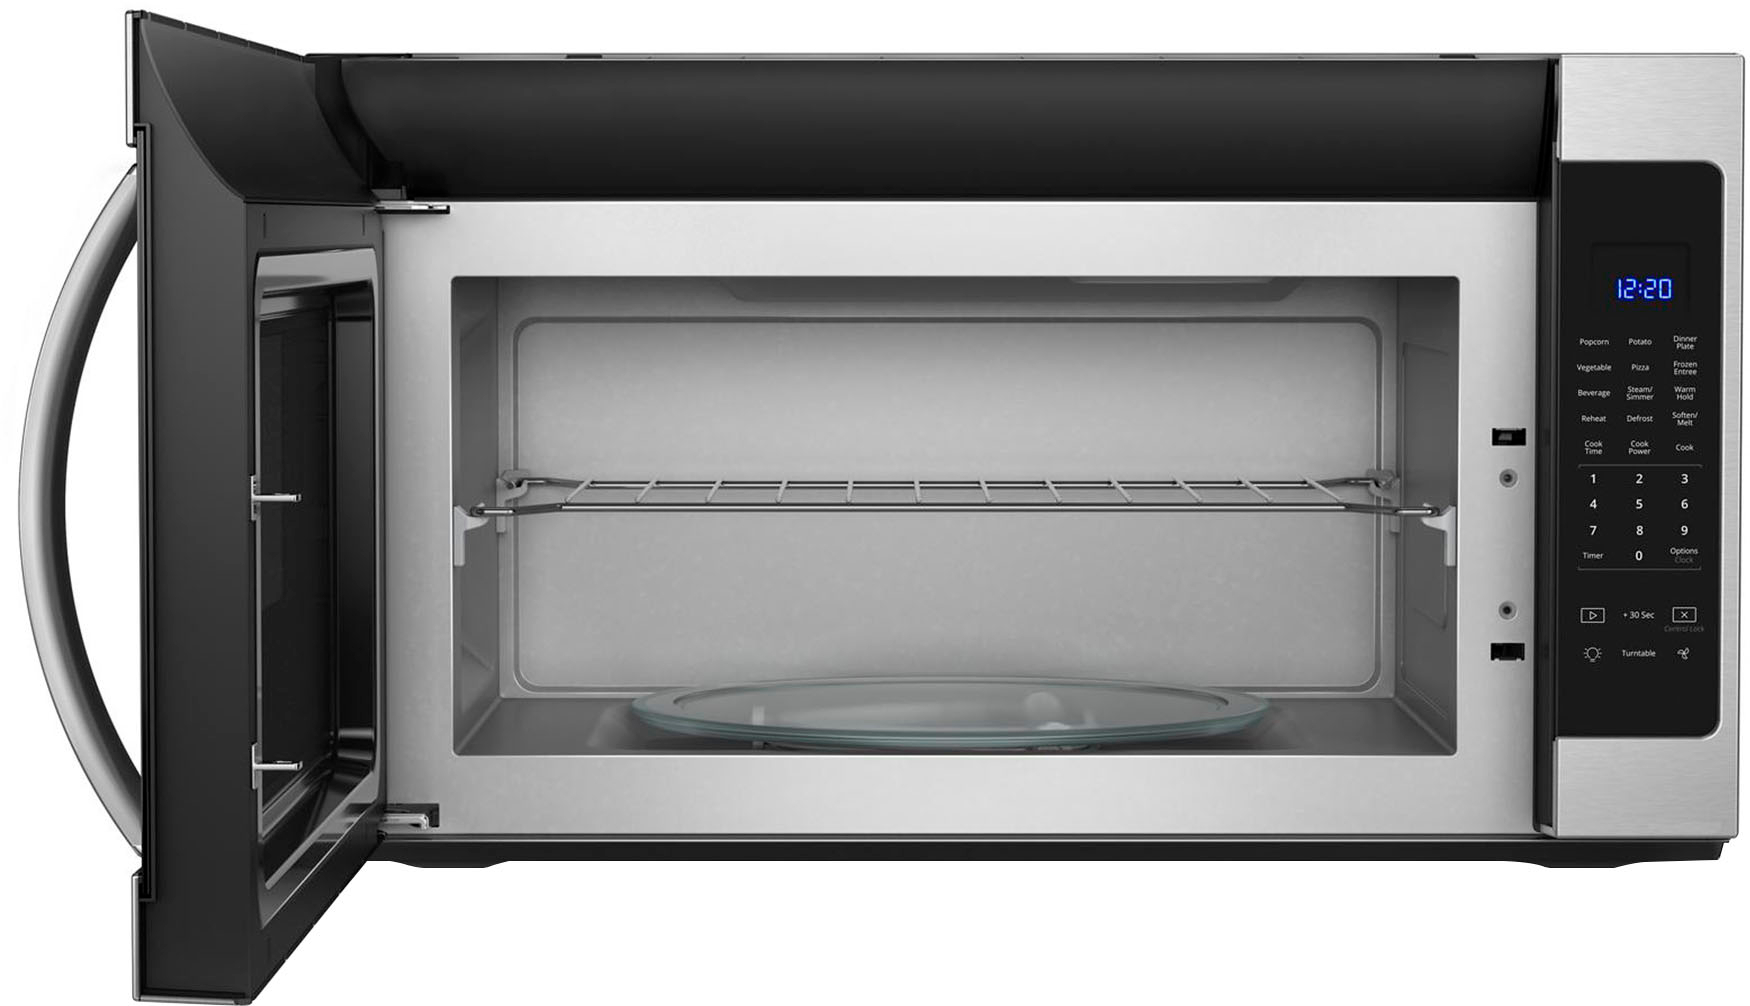 Whirlpool - 2.1 Cu. Ft. Over-the-Range Microwave with Sensor Cooking - Stainless steel